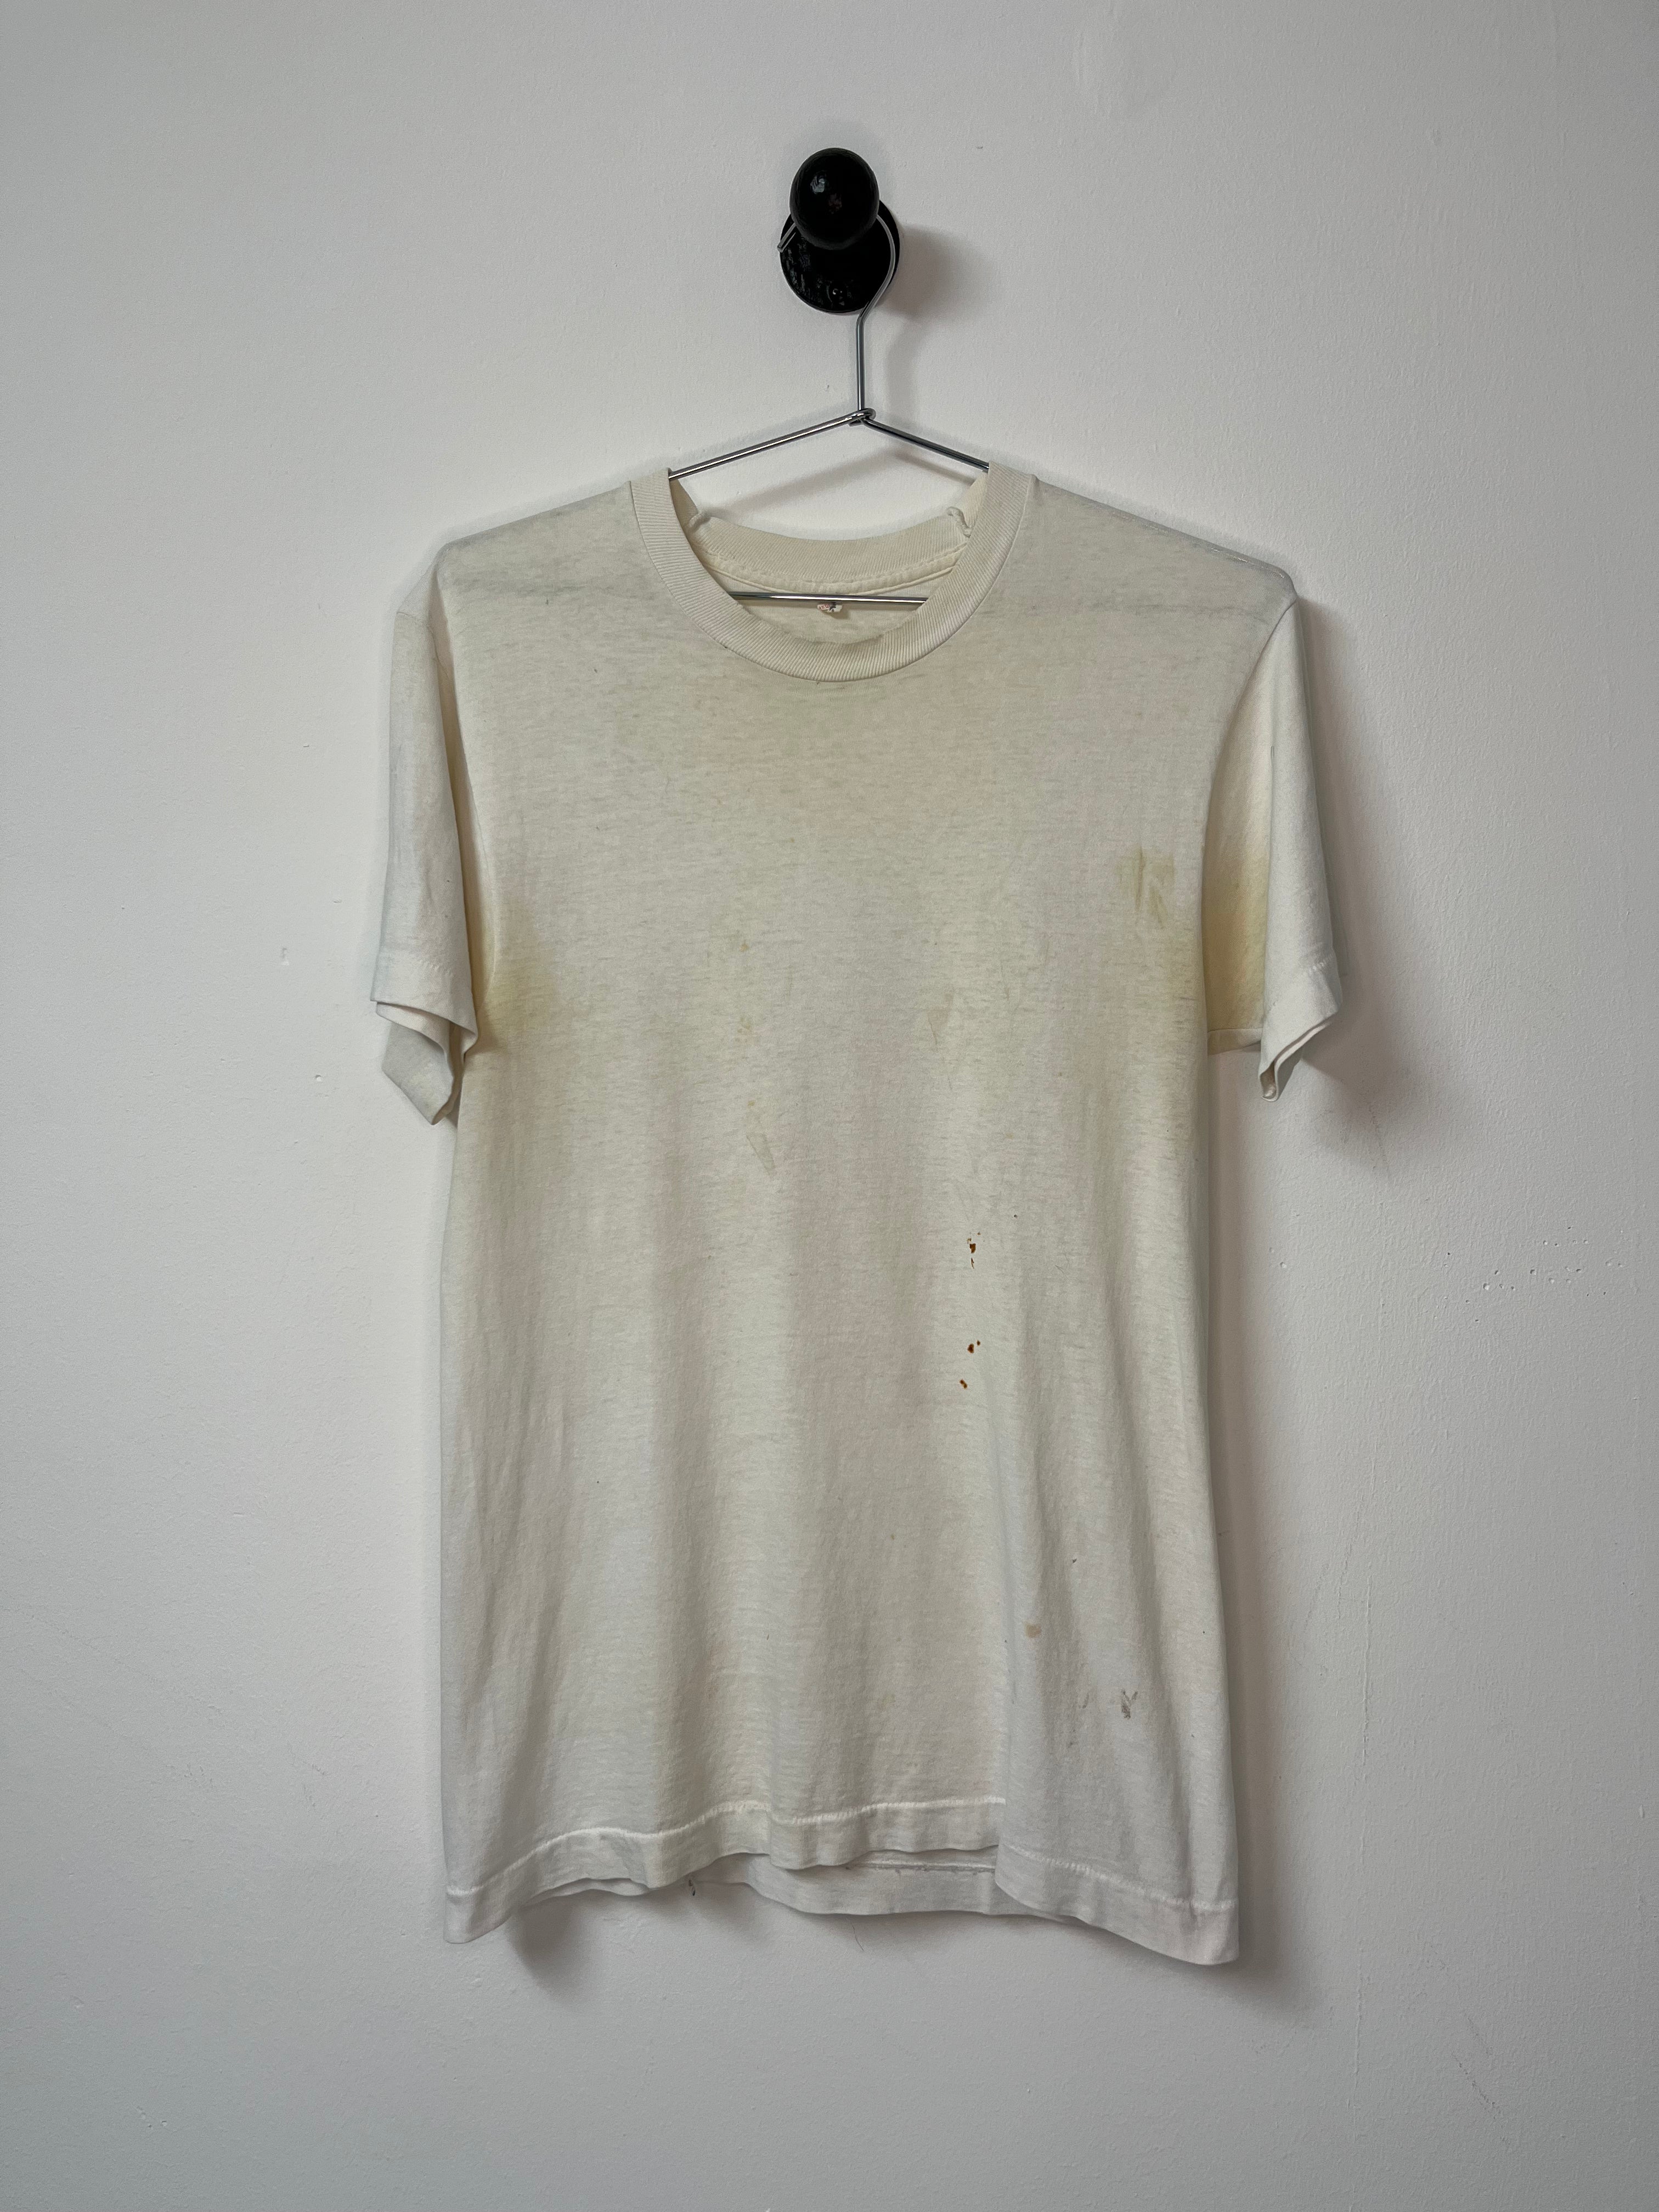 70’s Distressed Blank White T-Shirt - Aged White with Slight Discoloration - M/L Long